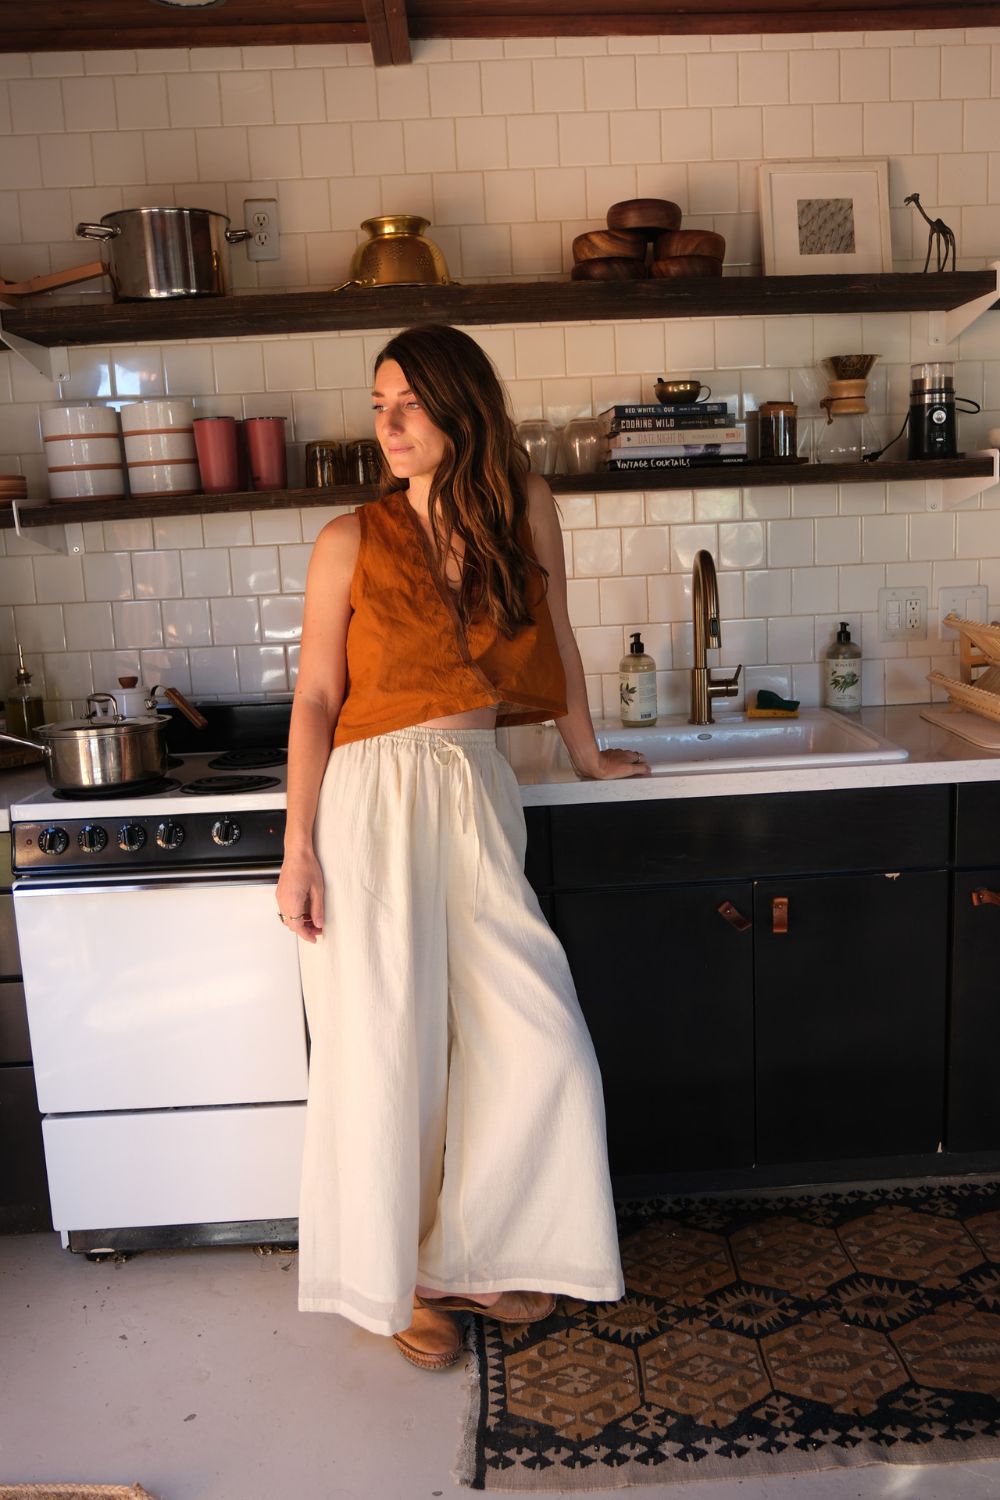 Wide-legged Relaxed Pants